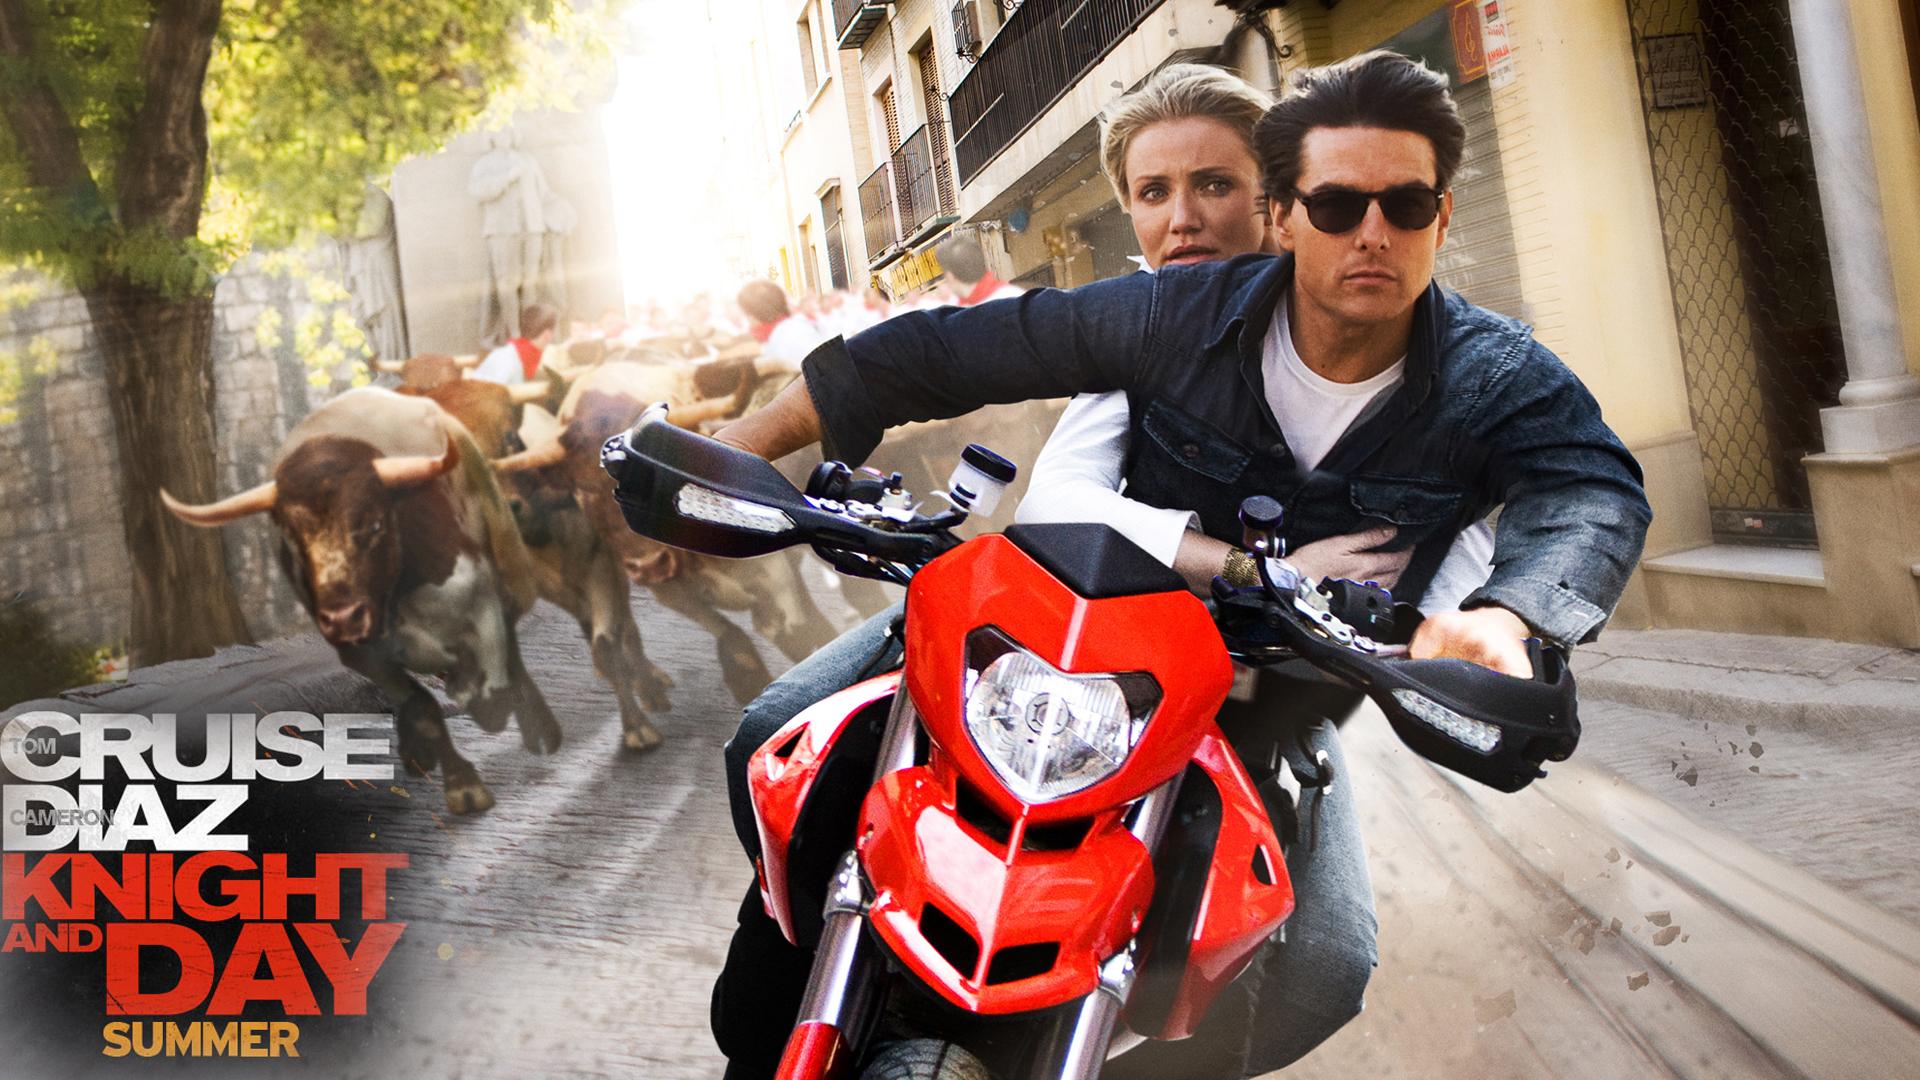 DdUAaC: Knight and Day (2010)